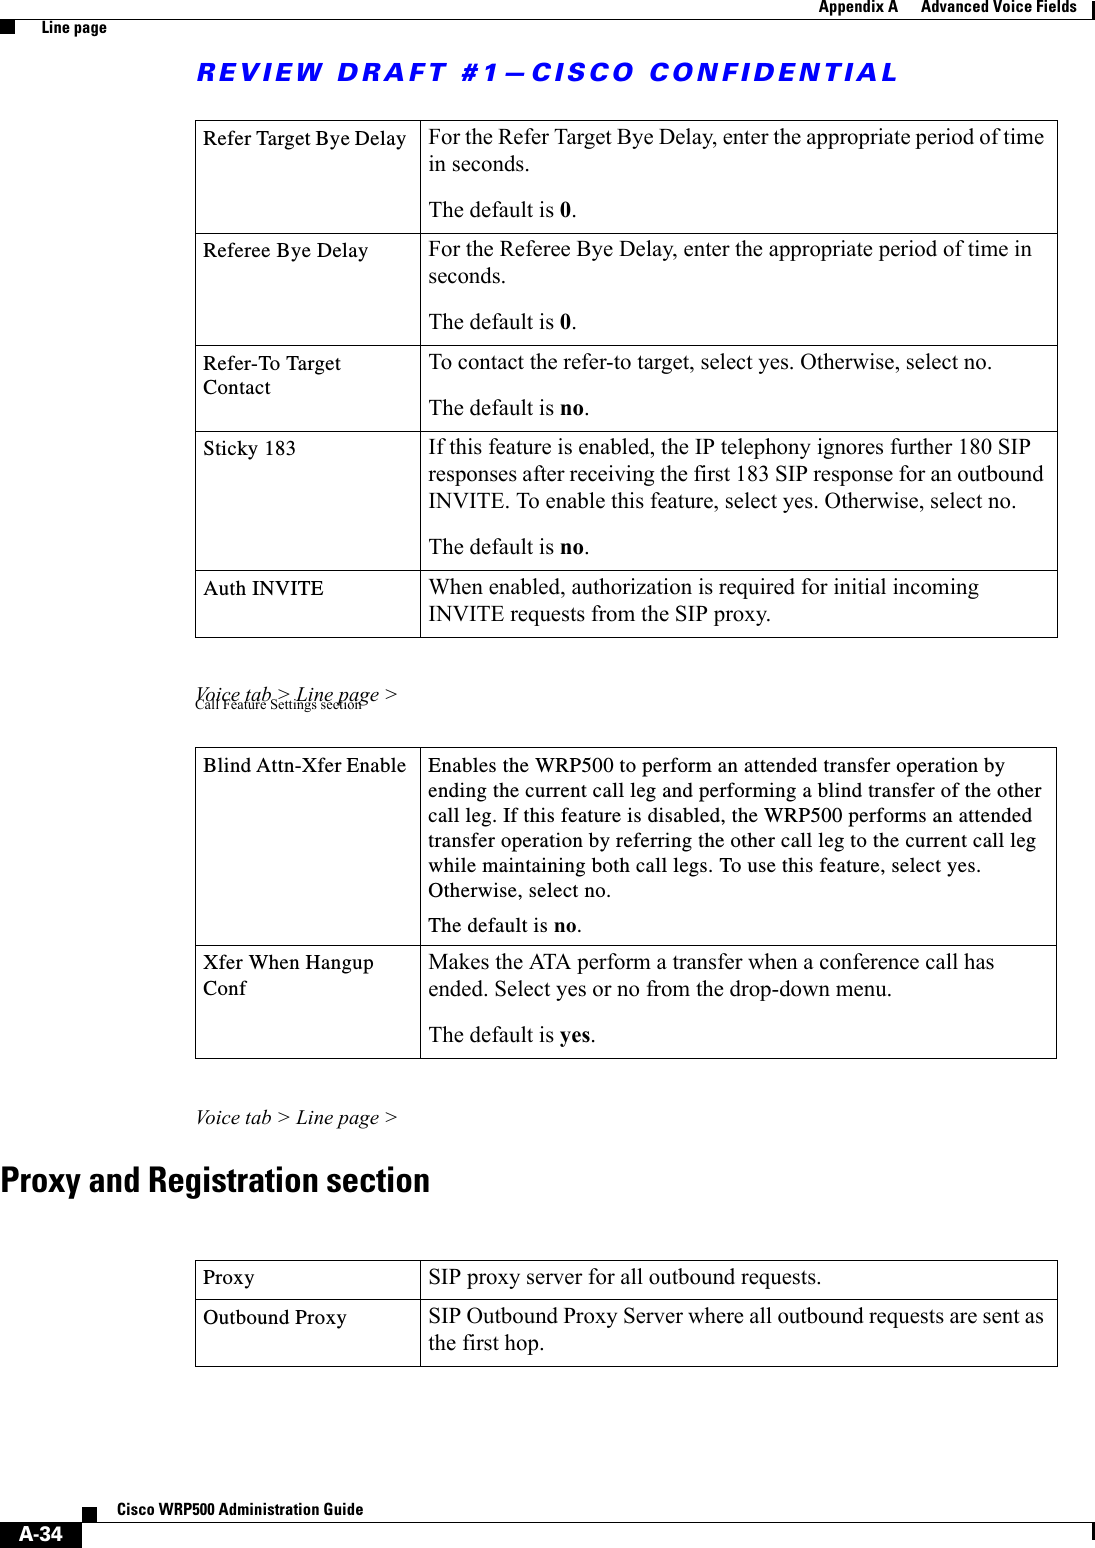 REVIEW DRAFT #1—CISCO CONFIDENTIALA-34Cisco WRP500 Administration Guide Appendix A      Advanced Voice Fields  Line pageVoice tab &gt; Line page &gt;Call Feature Settings sectionVoice tab &gt; Line page &gt;Proxy and Registration sectionRefer Target Bye Delay  For the Refer Target Bye Delay, enter the appropriate period of time in seconds.The default is 0.Referee Bye Delay  For the Referee Bye Delay, enter the appropriate period of time in seconds.The default is 0.Refer-To Target Contact To contact the refer-to target, select yes. Otherwise, select no.The default is no.Sticky 183 If this feature is enabled, the IP telephony ignores further 180 SIP responses after receiving the first 183 SIP response for an outbound INVITE. To enable this feature, select yes. Otherwise, select no.The default is no.Auth INVITE When enabled, authorization is required for initial incoming INVITE requests from the SIP proxy. Blind Attn-Xfer Enable  Enables the WRP500 to perform an attended transfer operation by ending the current call leg and performing a blind transfer of the other call leg. If this feature is disabled, the WRP500 performs an attended transfer operation by referring the other call leg to the current call leg while maintaining both call legs. To use this feature, select yes. Otherwise, select no.The default is no.Xfer When Hangup Conf Makes the ATA perform a transfer when a conference call has ended. Select yes or no from the drop-down menu.The default is yes.Proxy SIP proxy server for all outbound requests.Outbound Proxy SIP Outbound Proxy Server where all outbound requests are sent as the first hop.